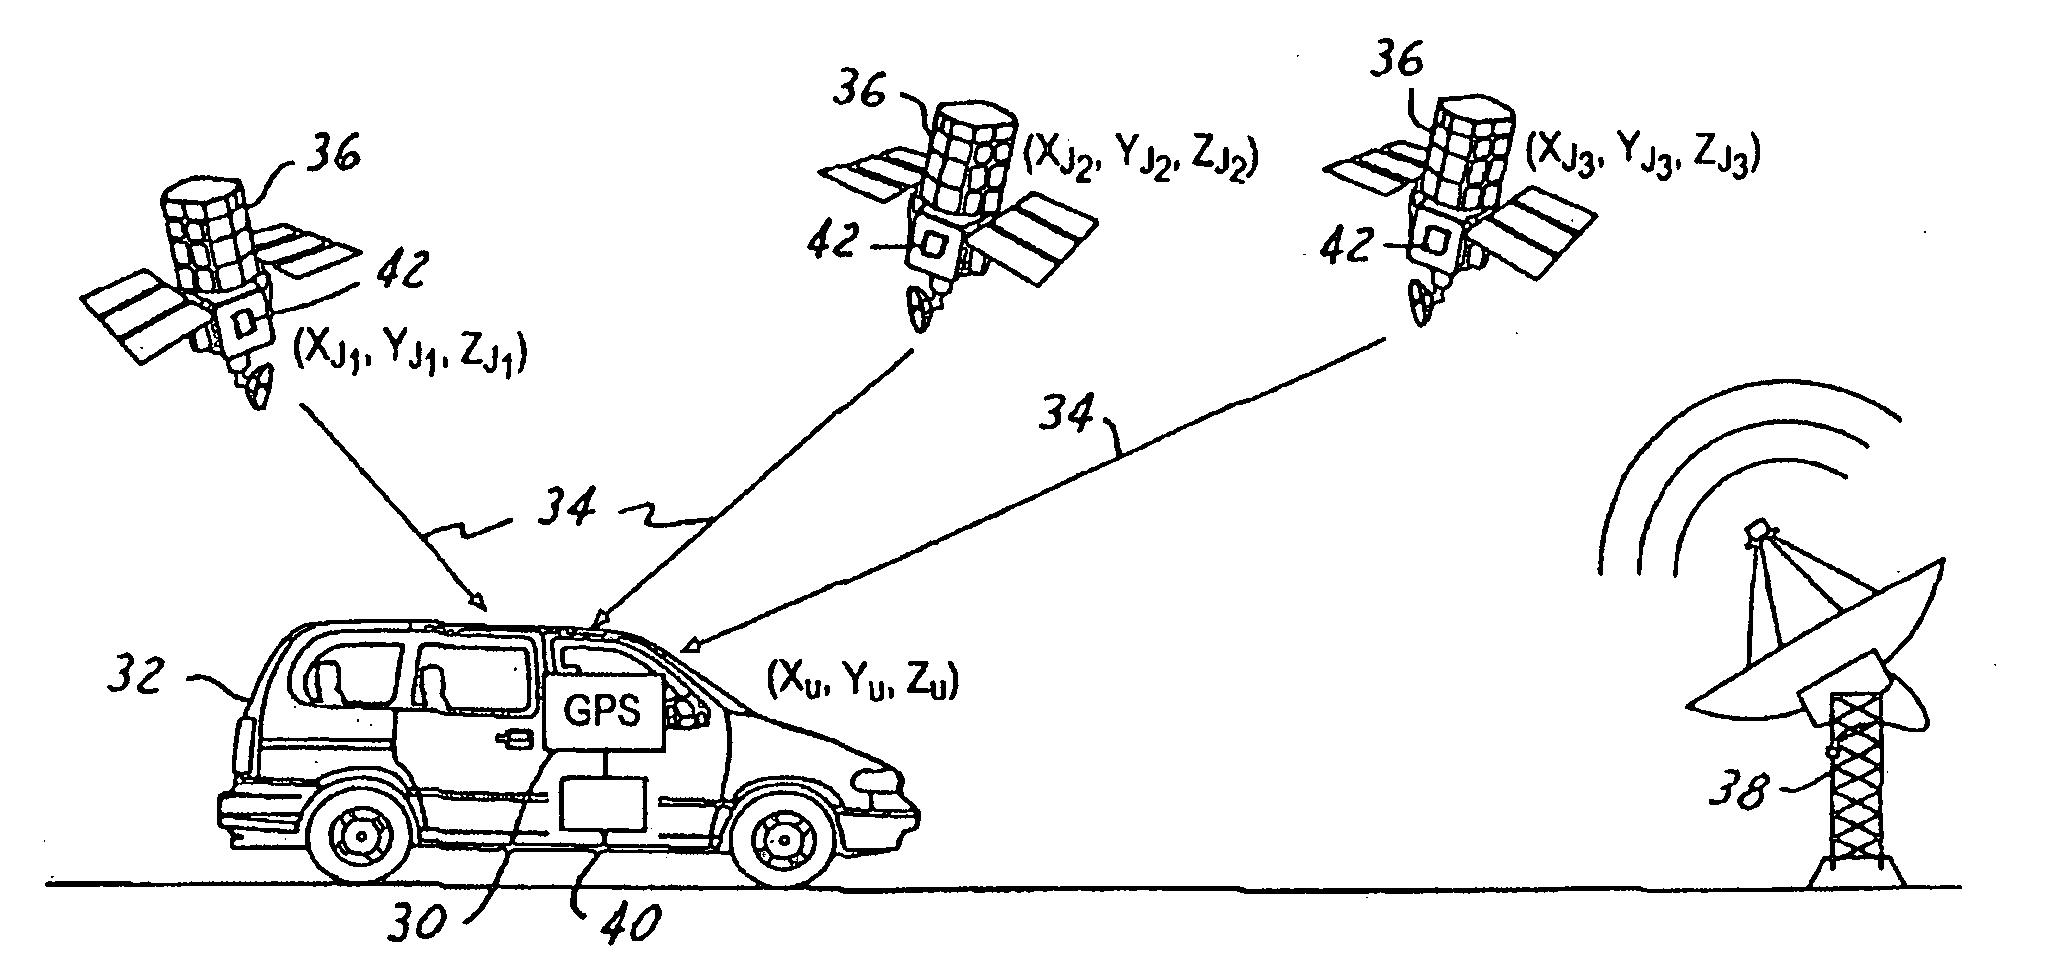 Collision avoidance system having GPS enhanced with OFDM transceivers